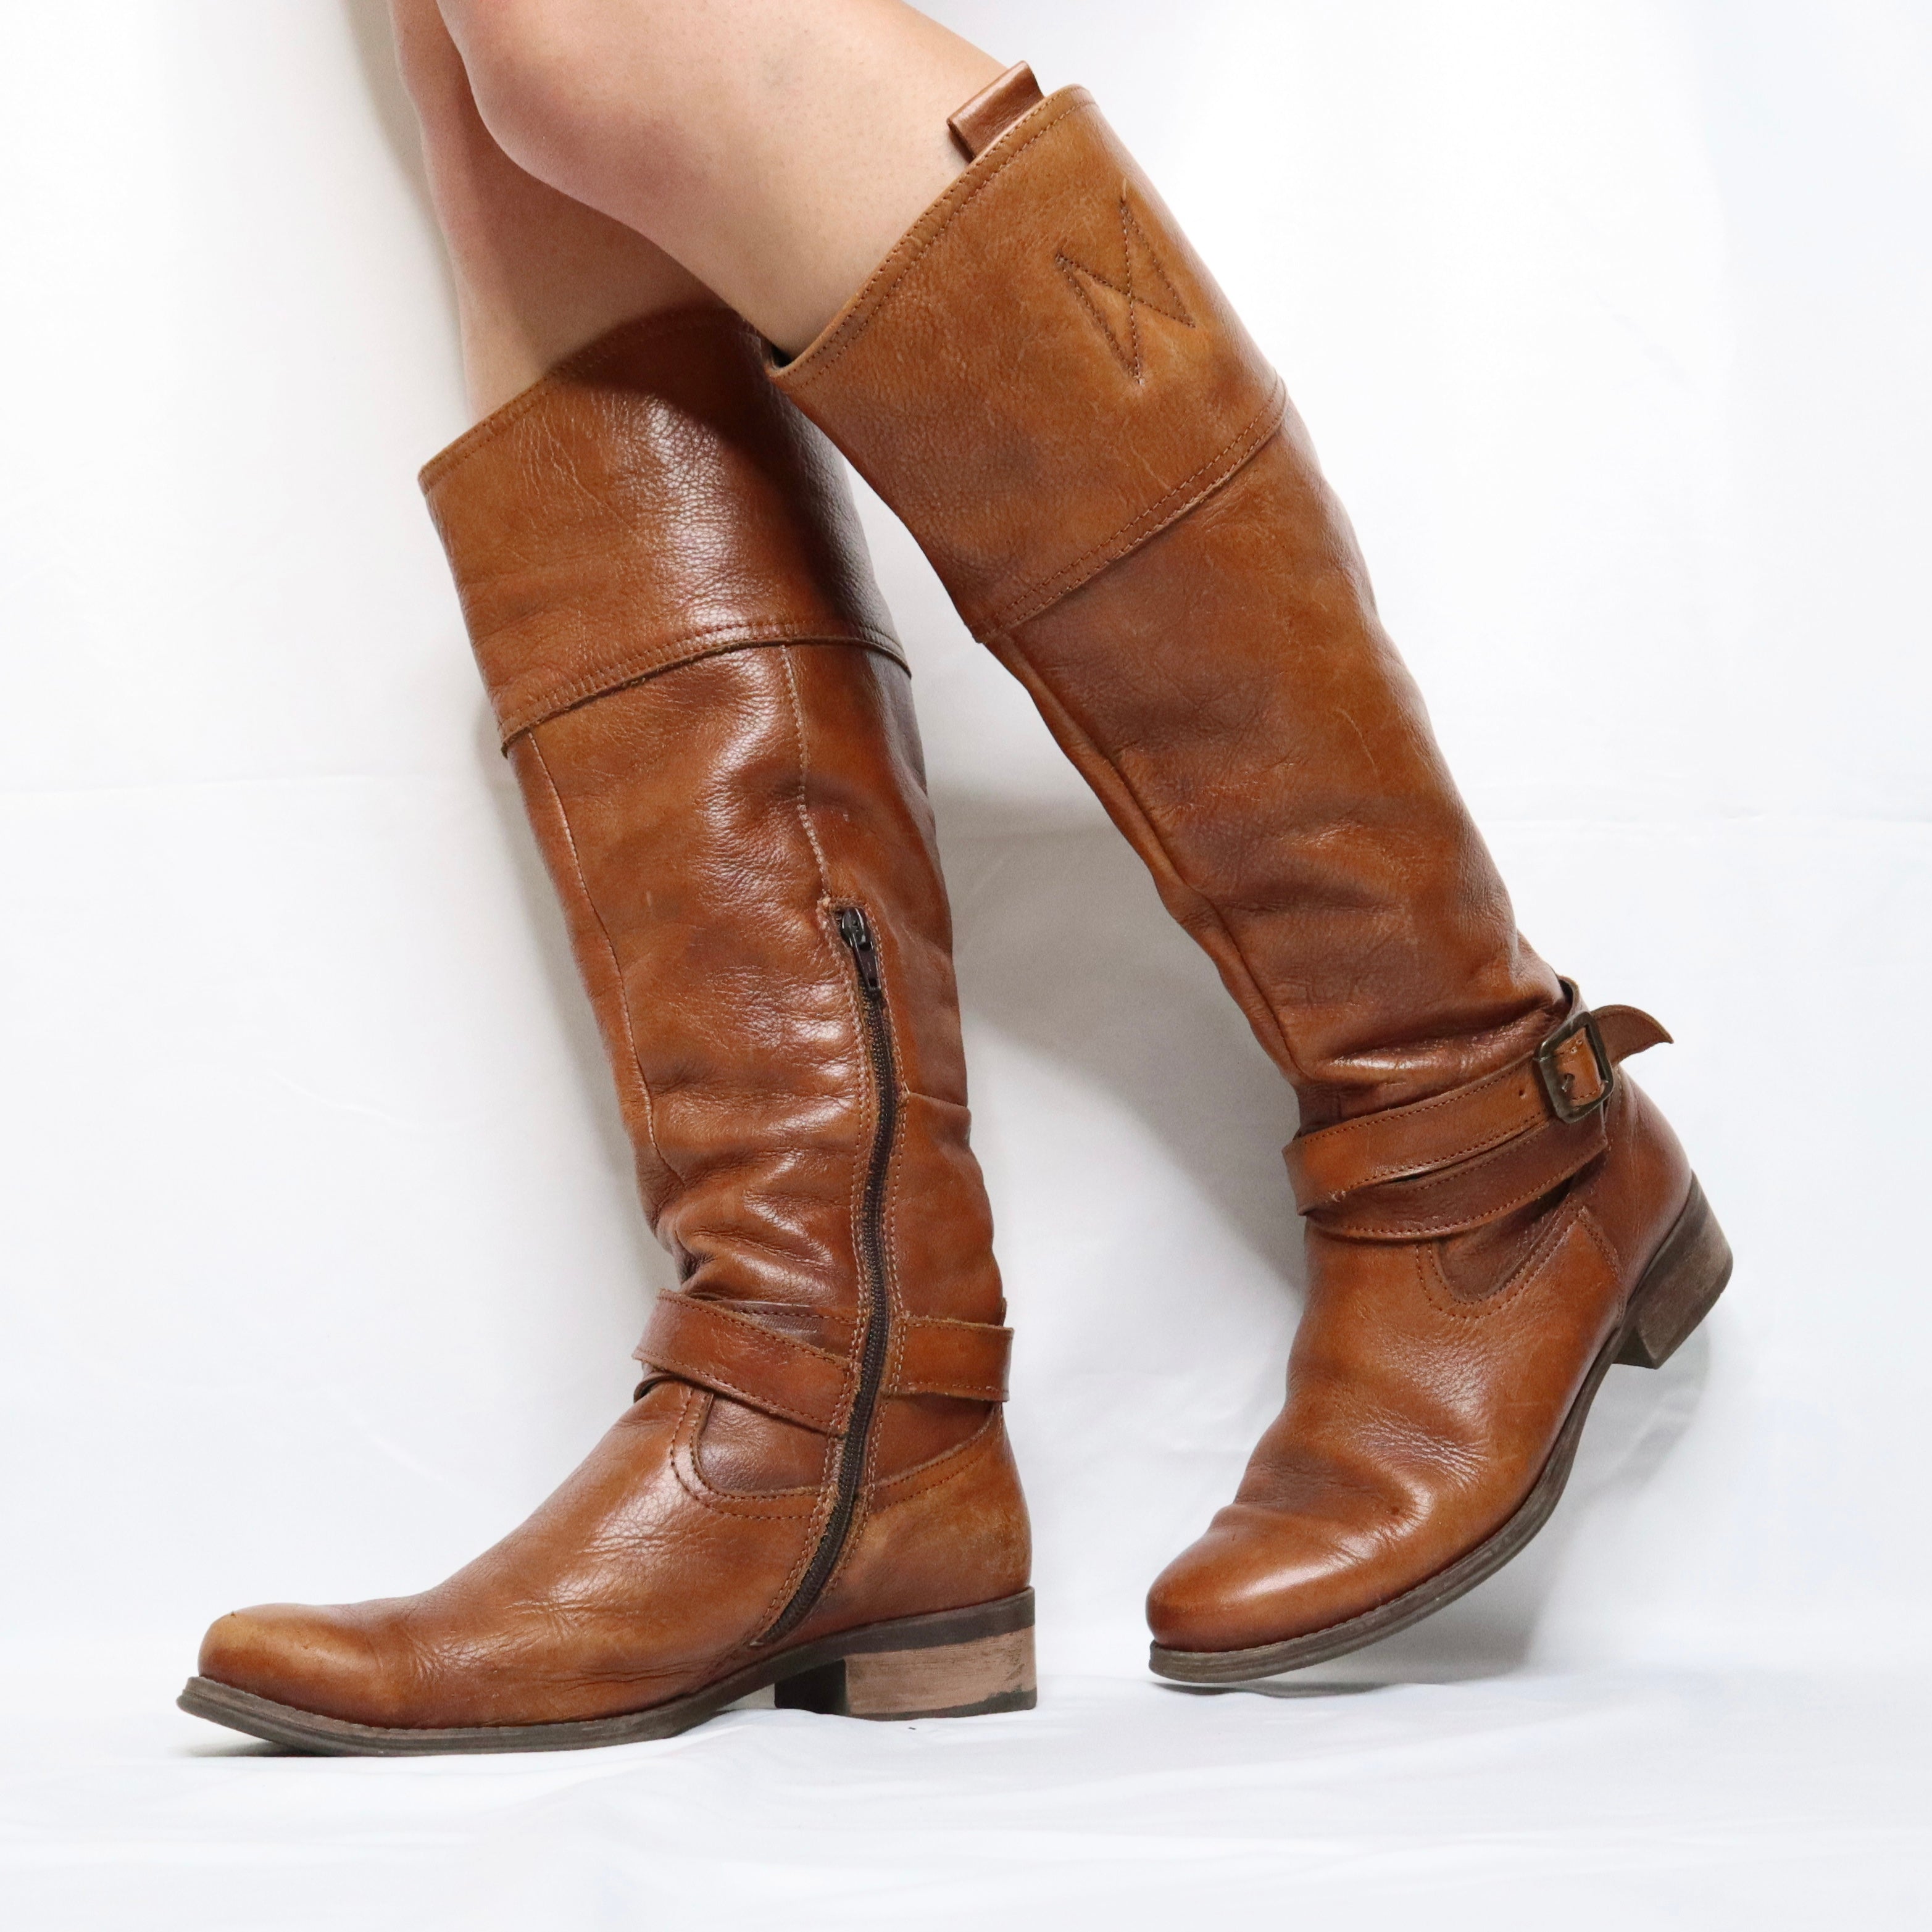 Brown Leather Riding Boots (8.5 US) - Imber Vintage